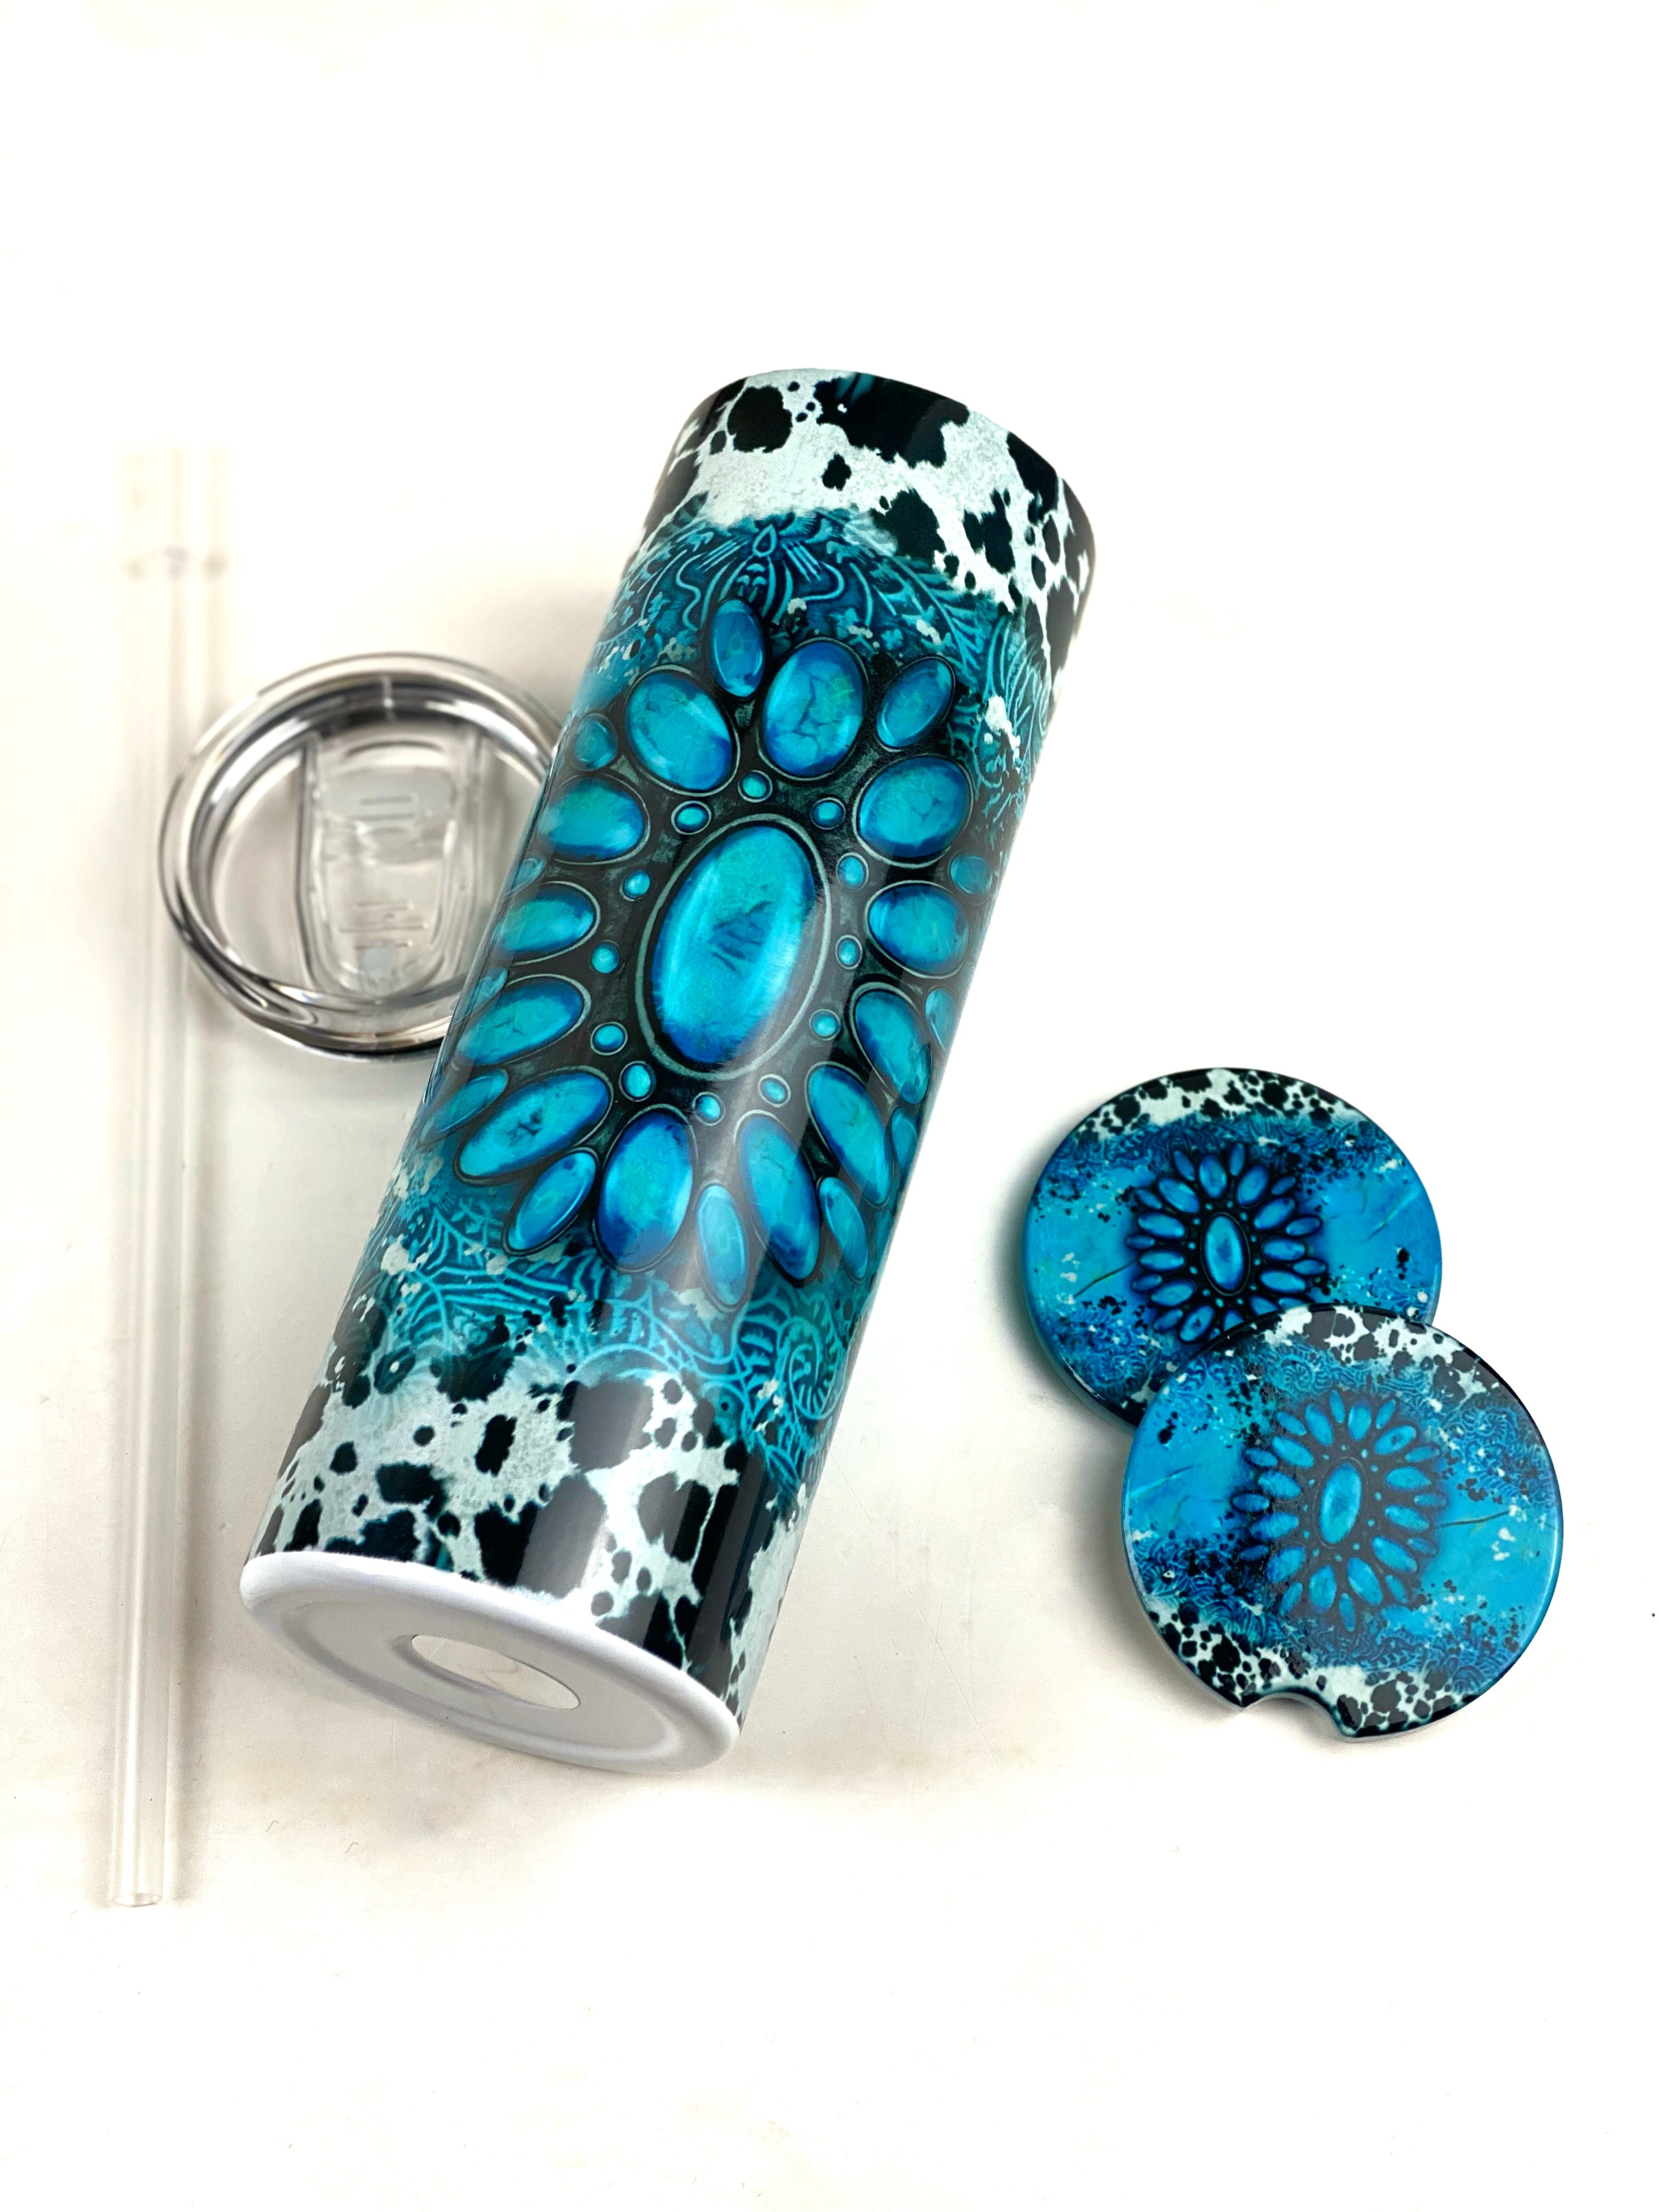 Turquoise and Cowhide 20 oz Stainless Steel Skinny Tumbler Sublimation